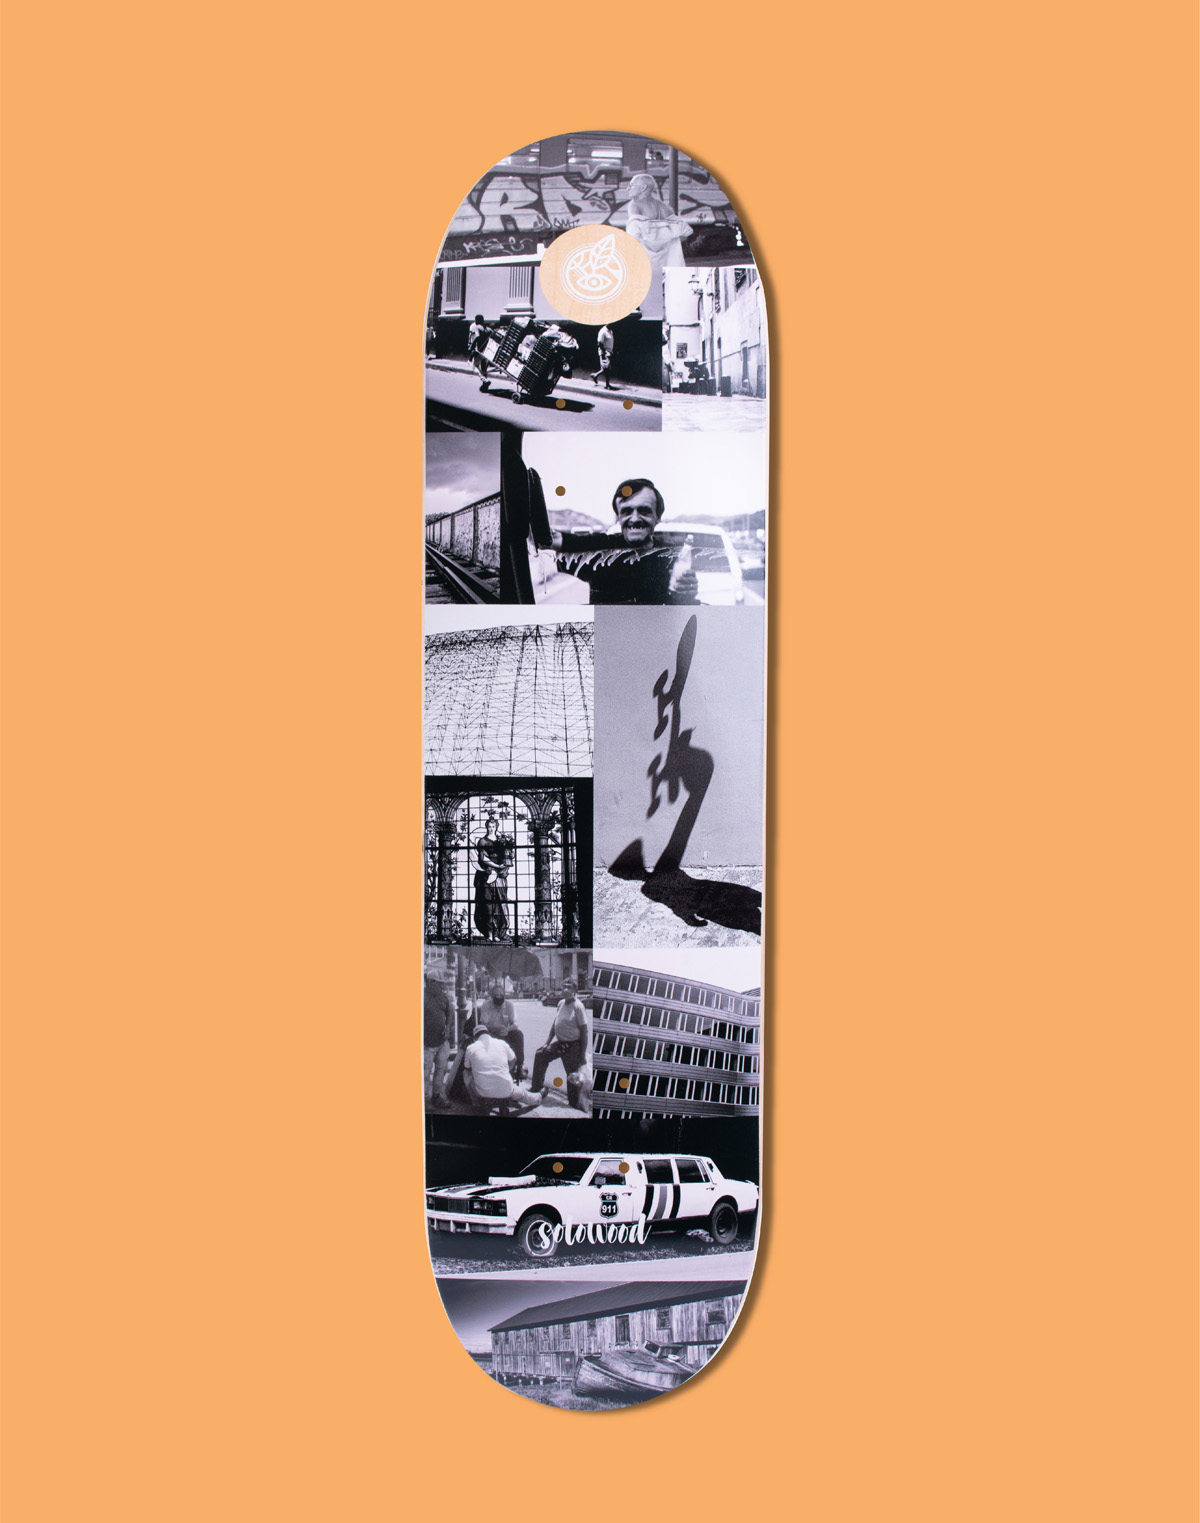 Collage Photo Series By Solowood Skateboards 3